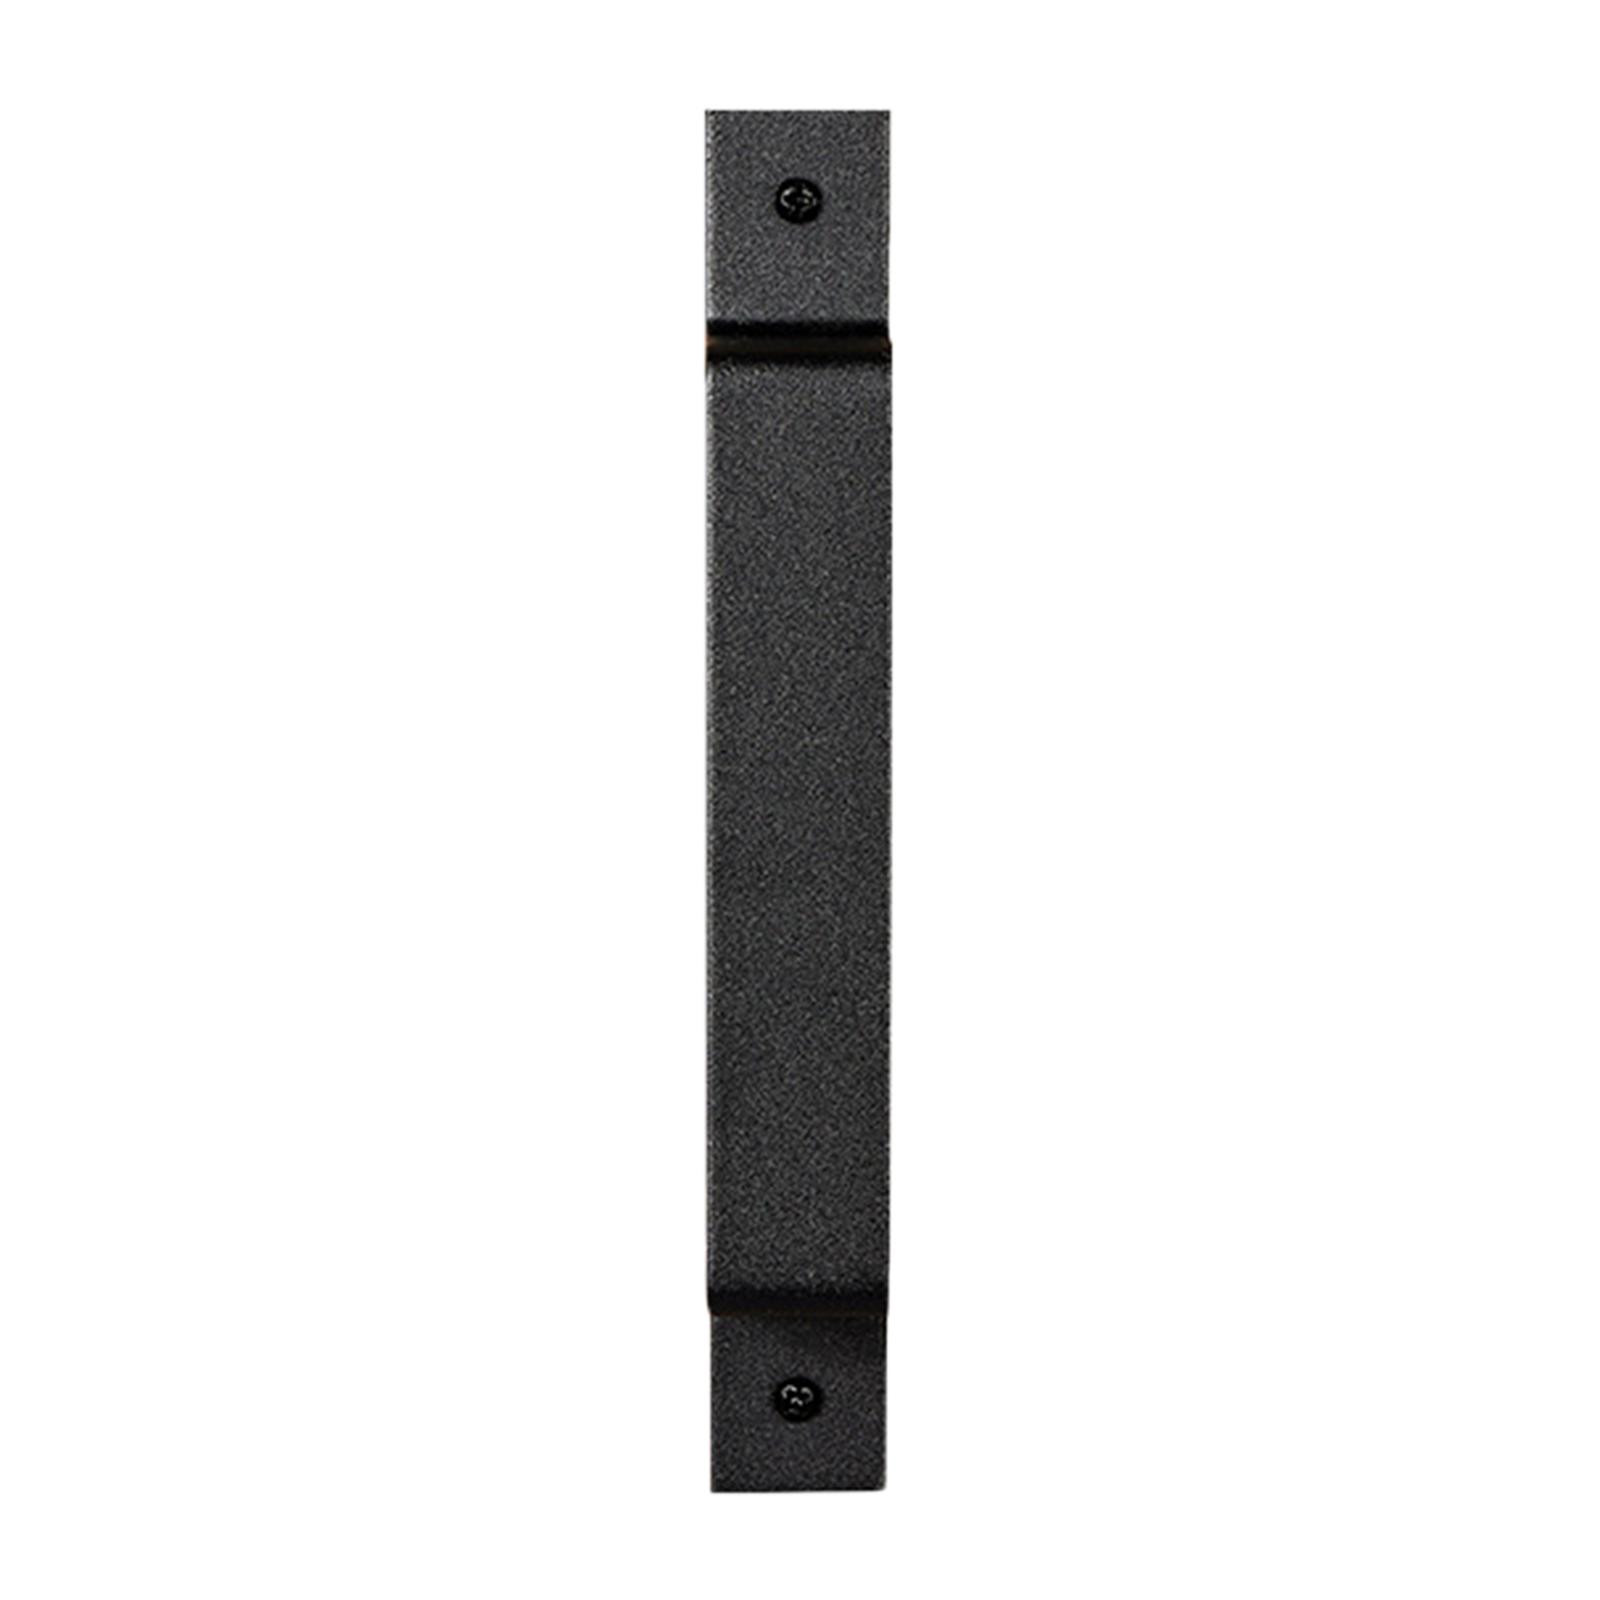 Carbon Steel Barn Door Handle with Screws for Living Room Kitchen Shed